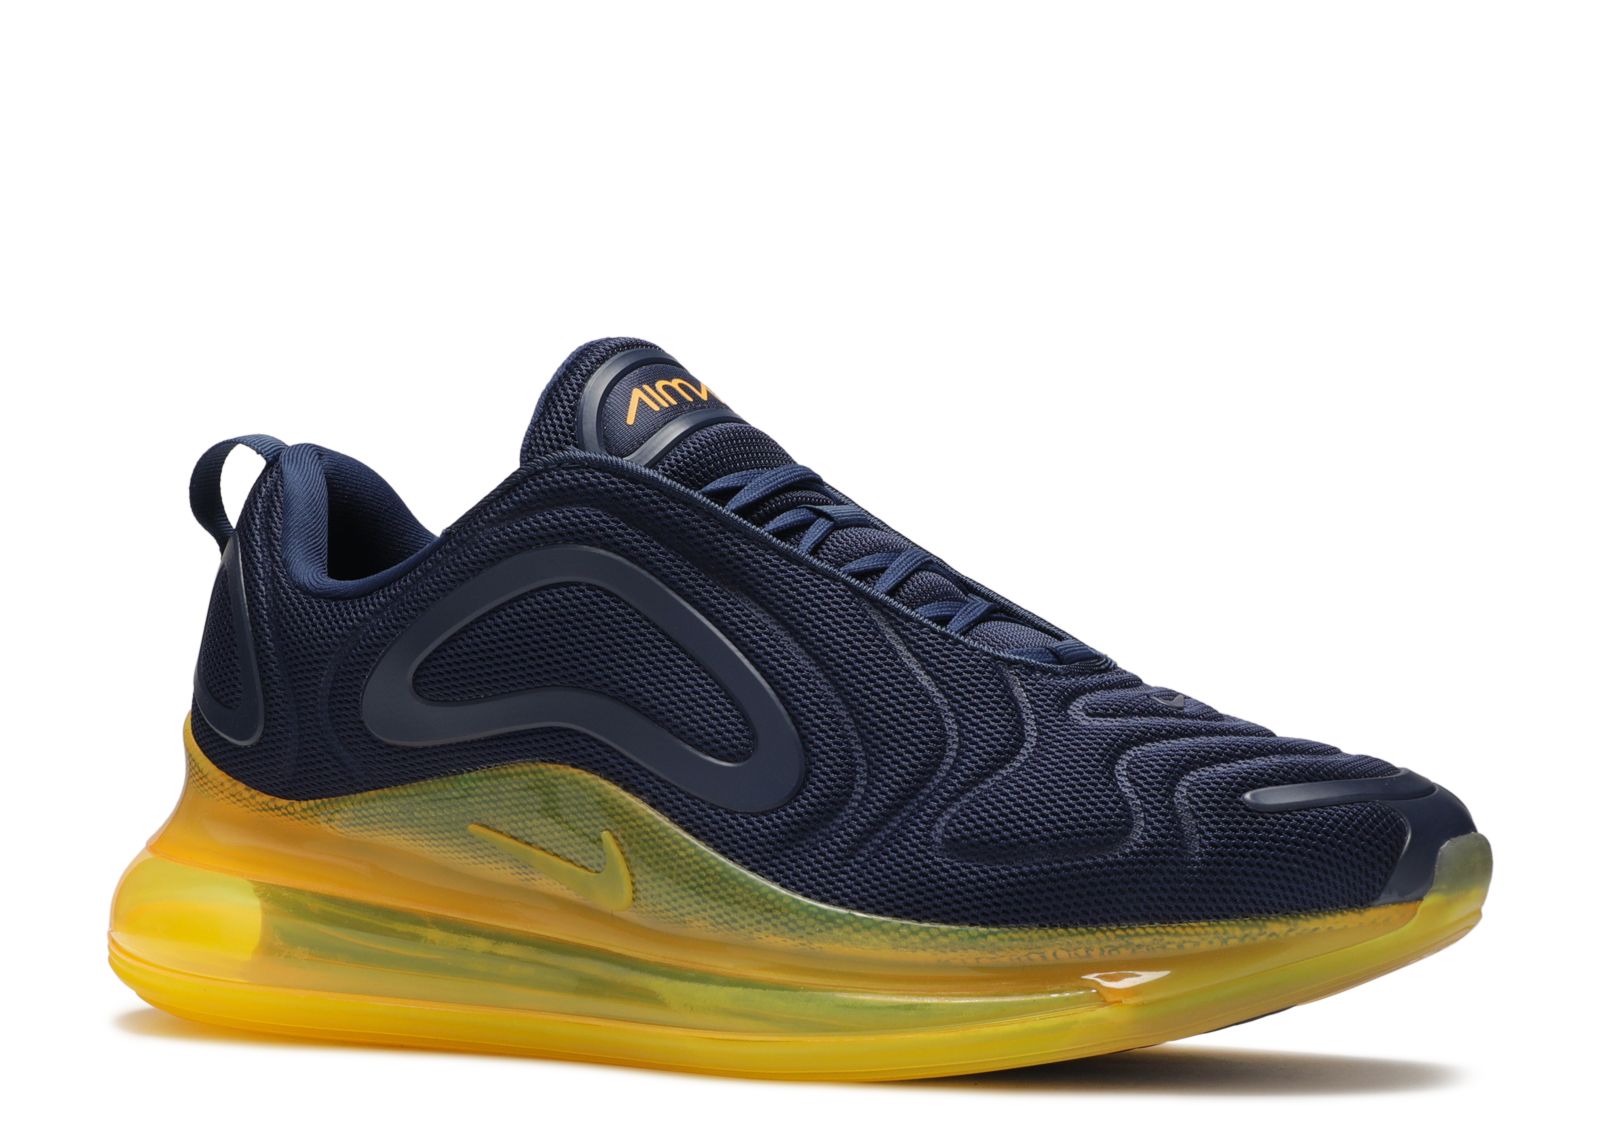 Nike Air Max 720 Midnight Navy AO2924-403 Release Info